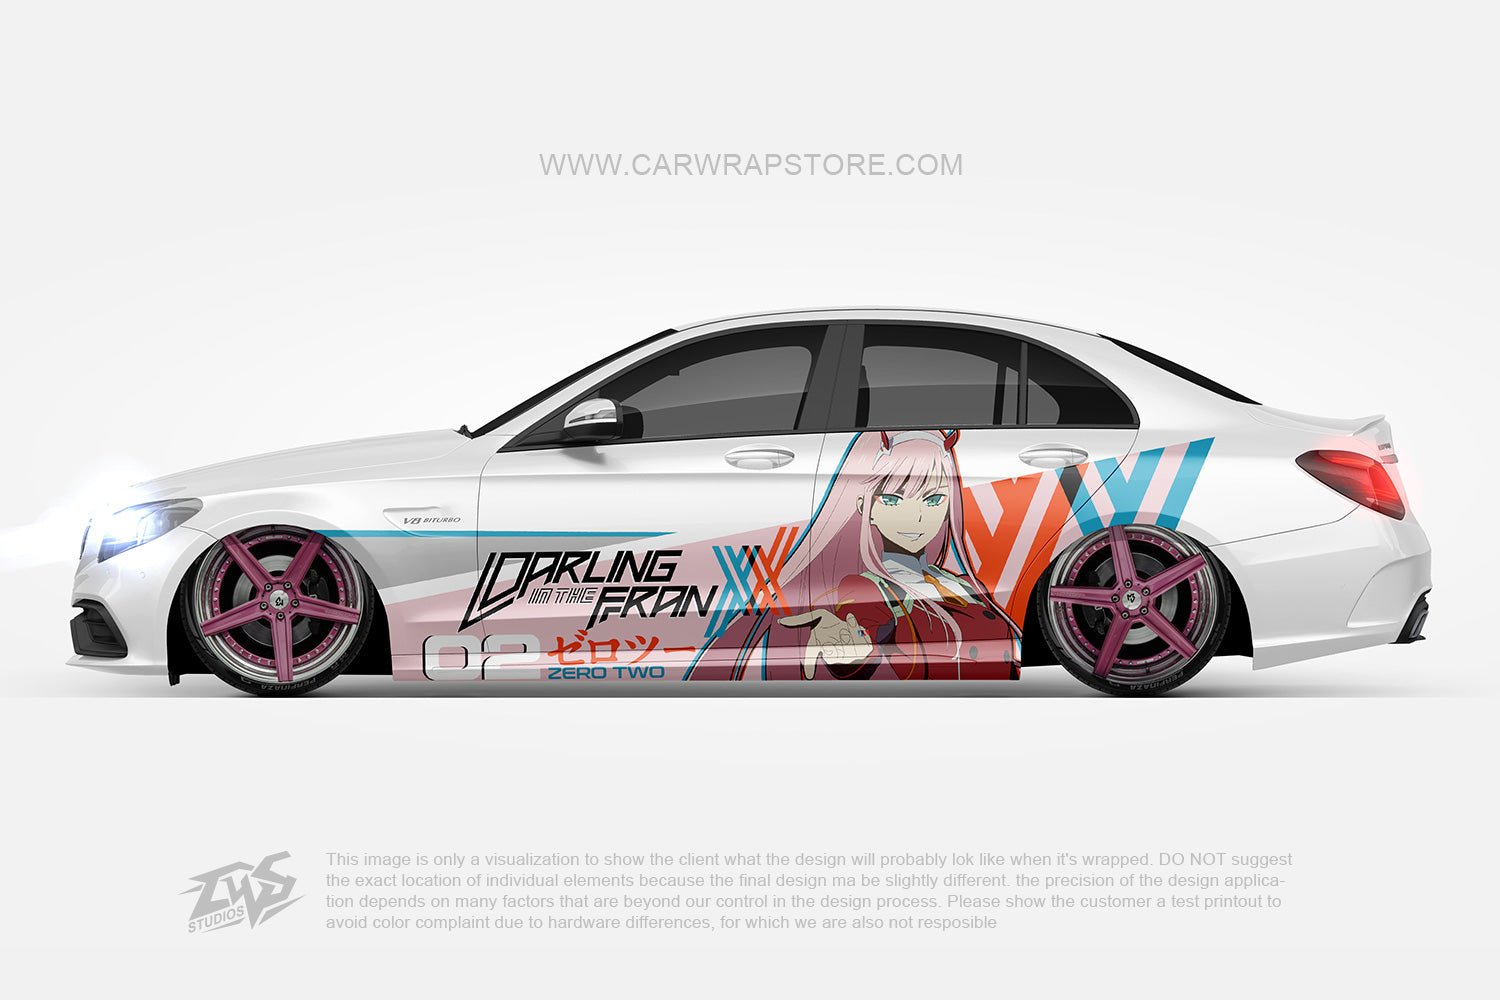 Zero Two DARLING in the FRANXX【002-16】 - Car Wrap Store